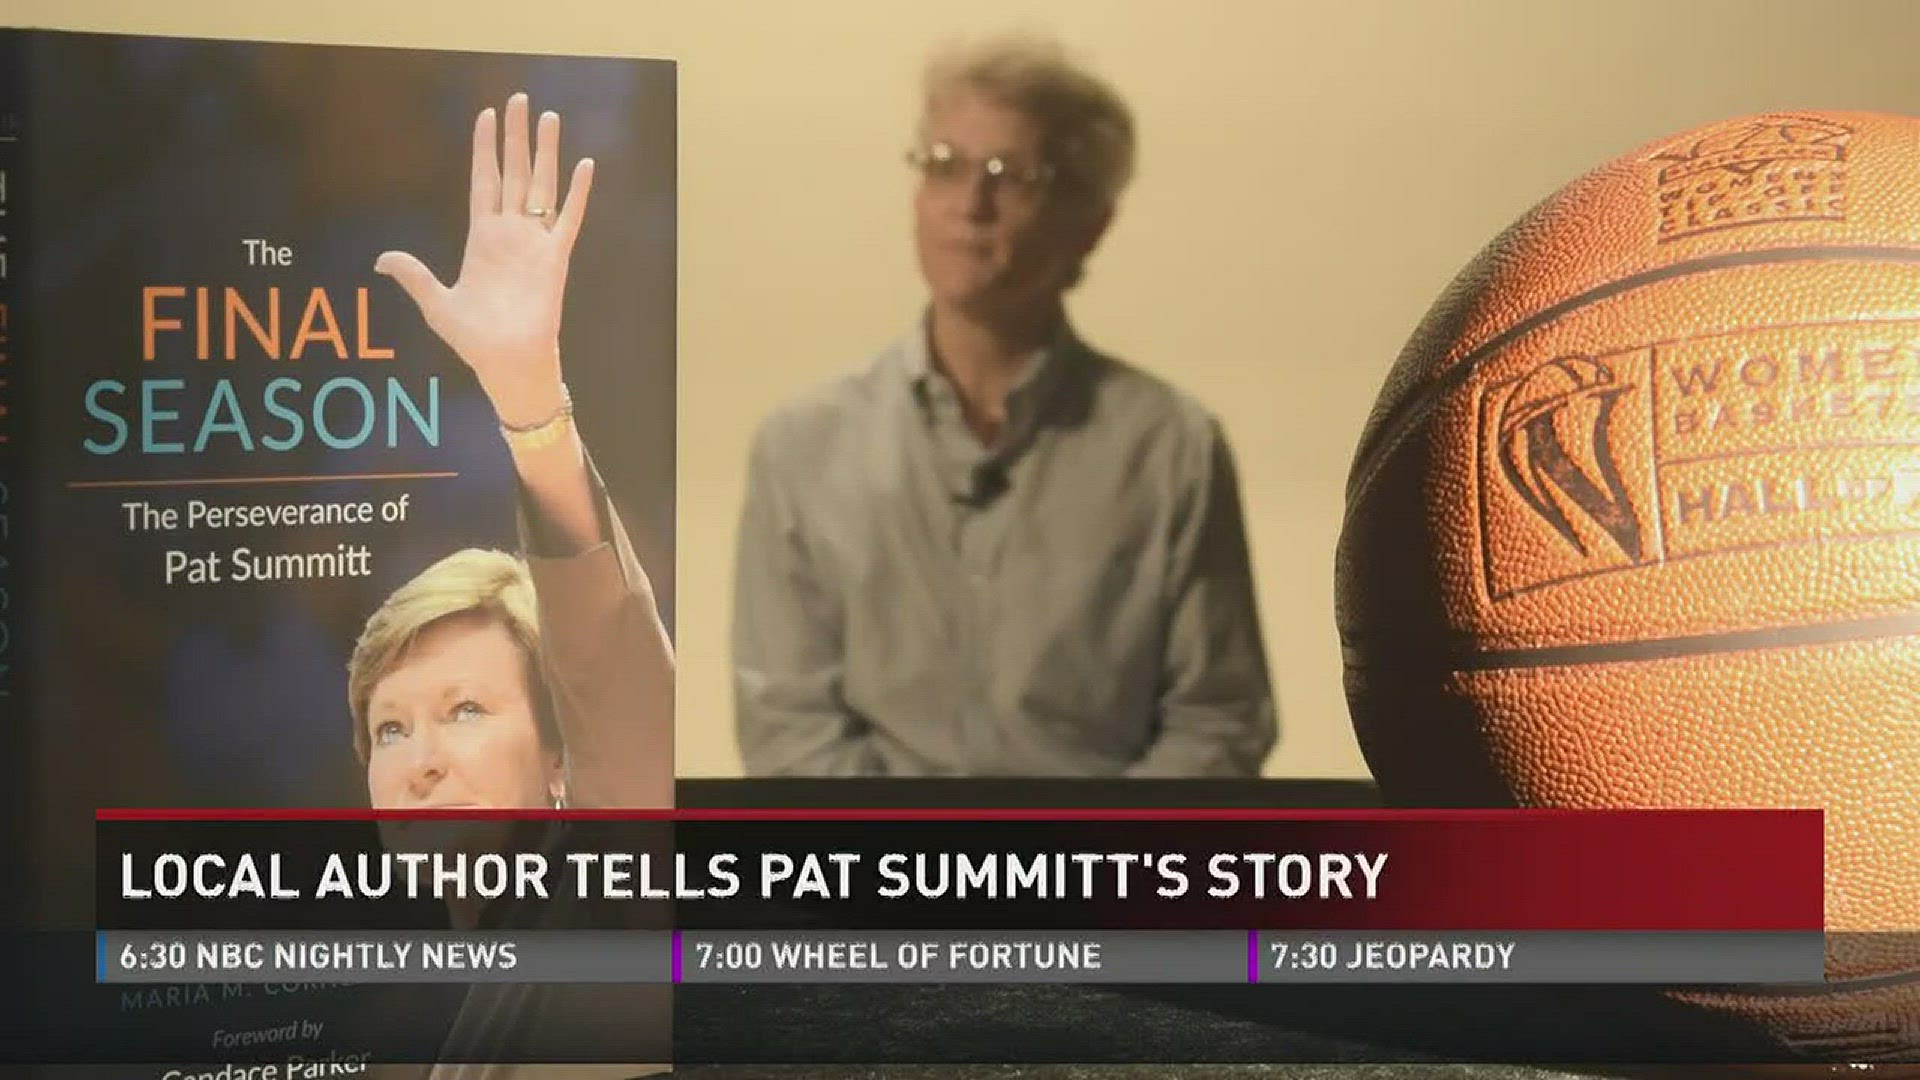 June 27, 2017: A year after her death, Pat Summitt's friend Maria Cornelius reflects on the book she wrote about the coach's final season.